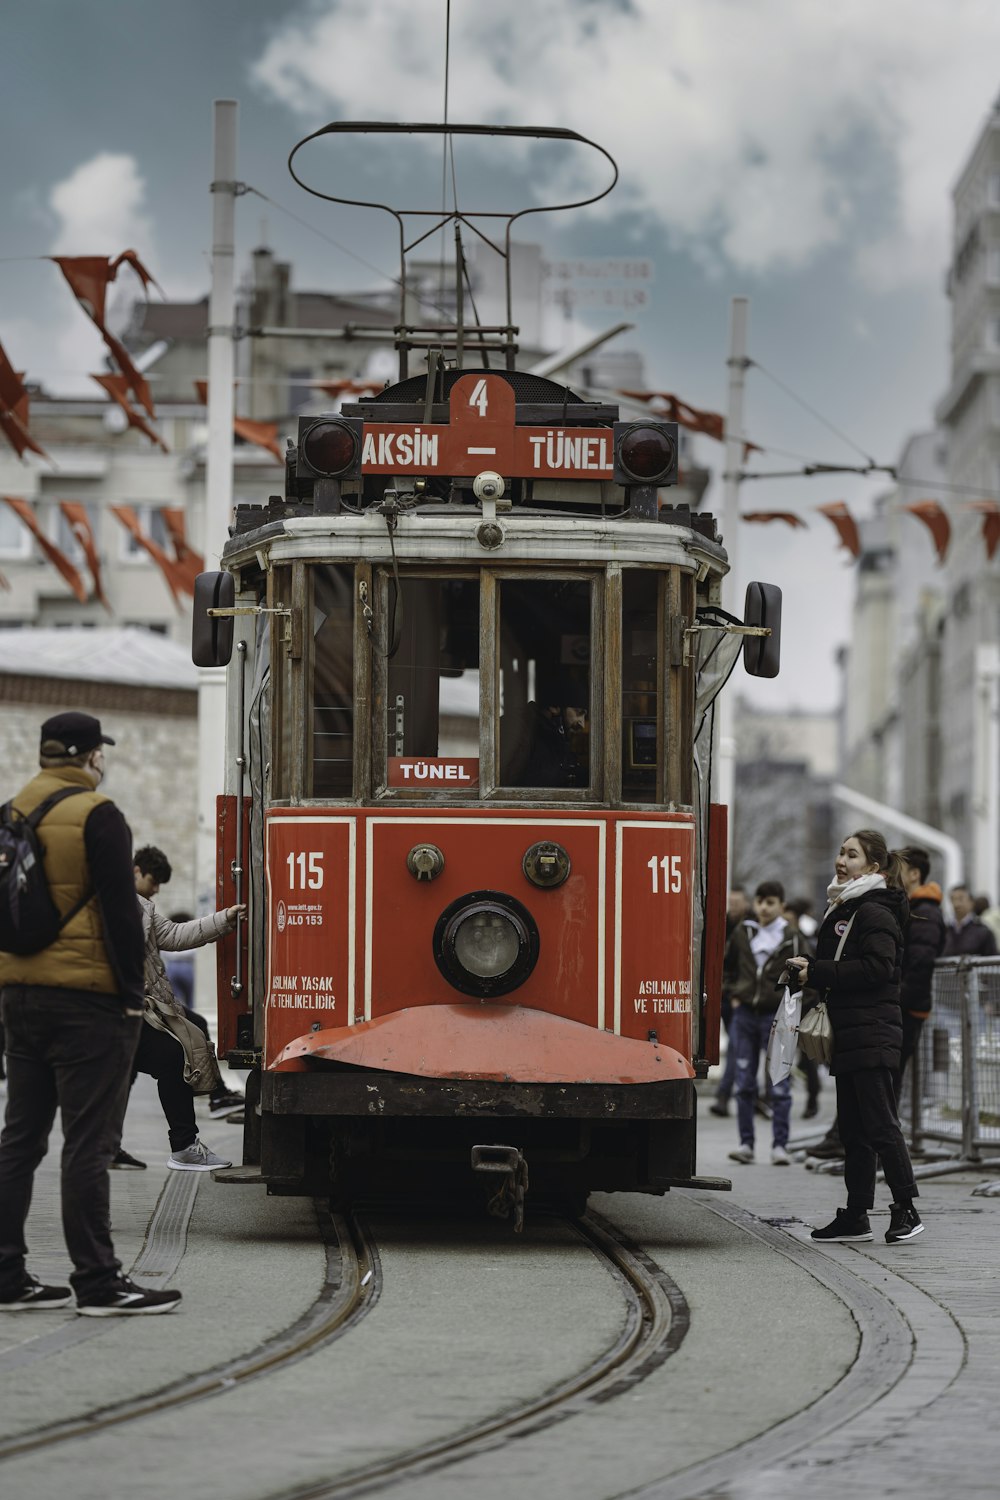 a red trolley car traveling down a street next to a crowd of people